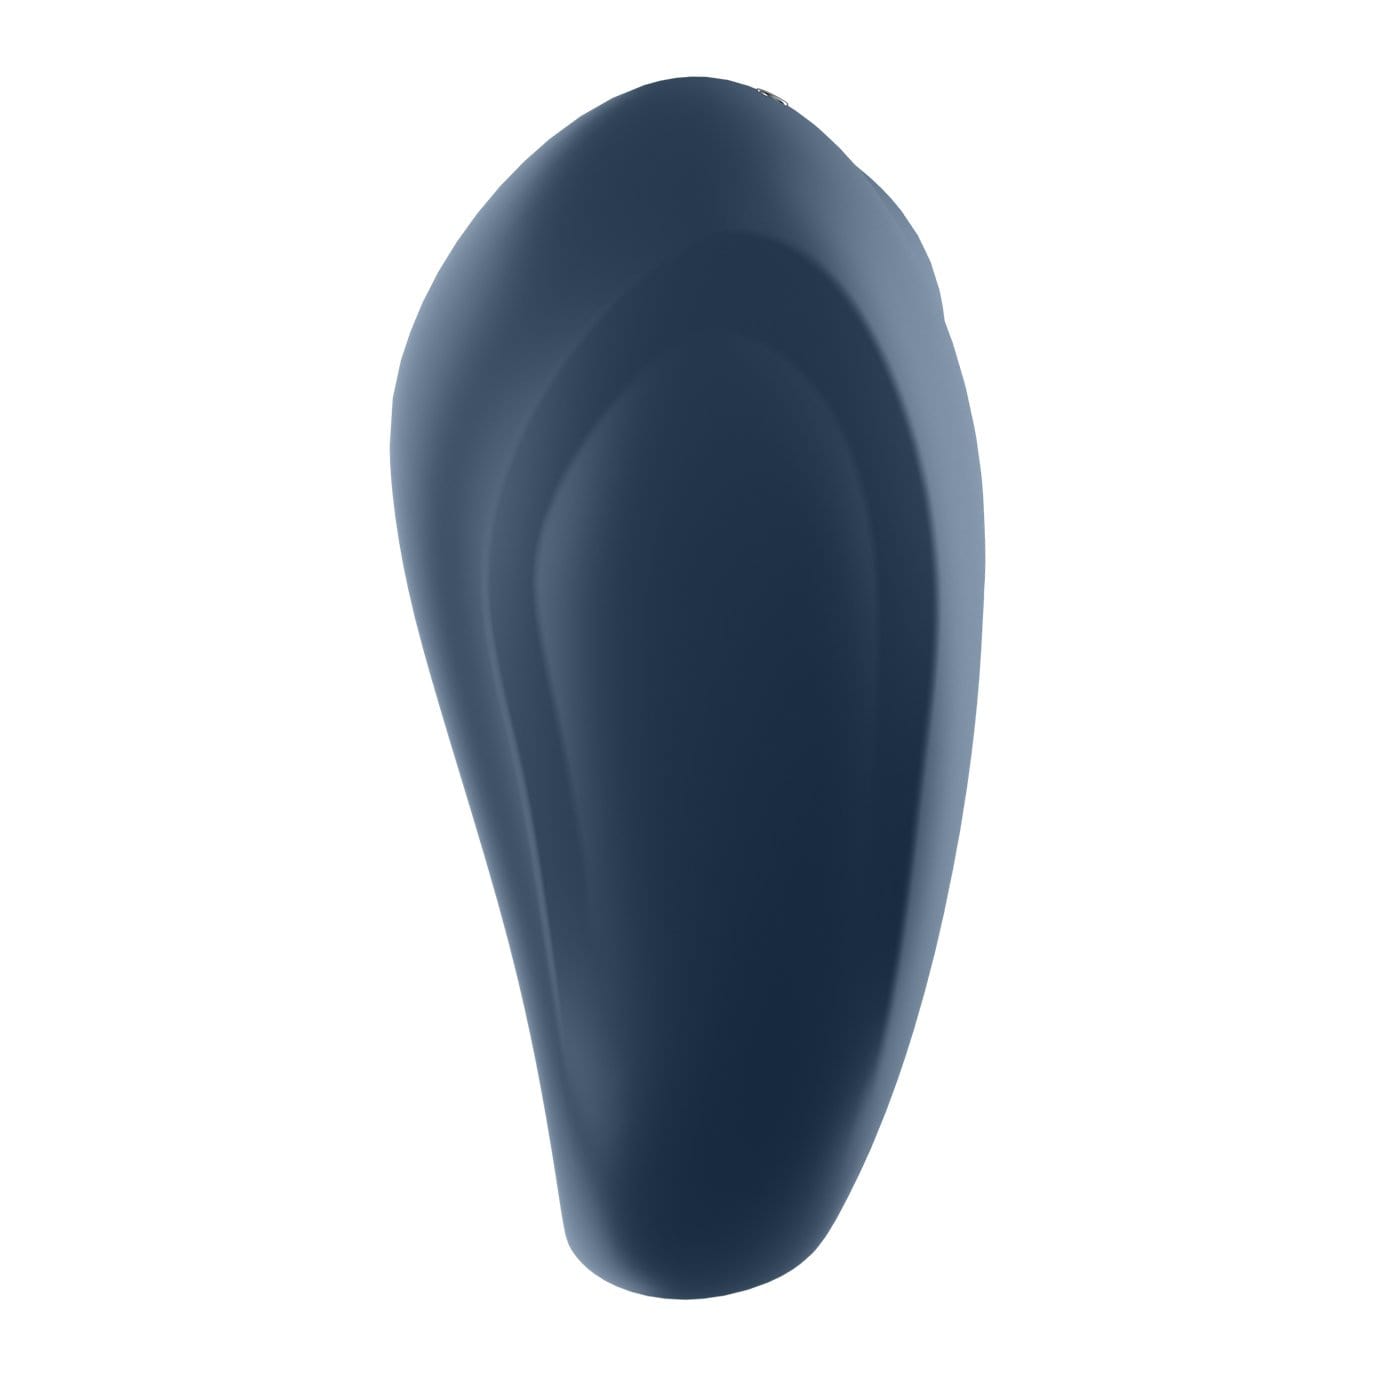 Satisfyer - Strong One App-Controlled Silicone Cock Ring (Blue Black) Silicone Cock Ring (Vibration) Rechargeable 4061504001968 CherryAffairs